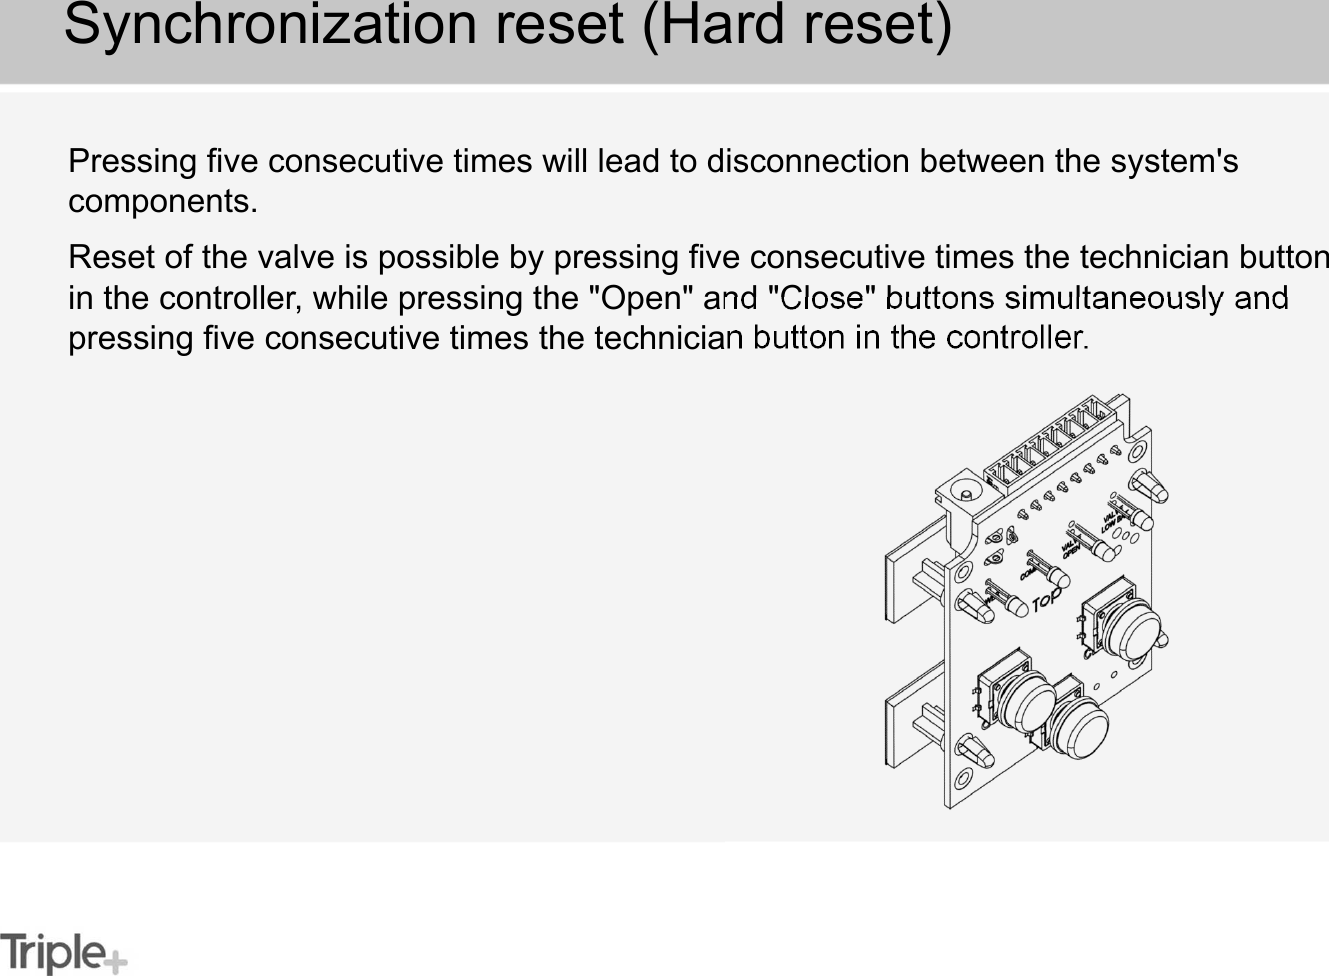 Pressing five consecutive times will lead to disconnection between the system&apos;s components.Reset of the valve is possible by pressing five consecutive times the technician button in the controller, while pressing the &quot;Open&quot; and &quot;Close&quot; buttons simultaneously and pressing five consecutive times the technician button in the controller.Synchronization reset (Hard reset)